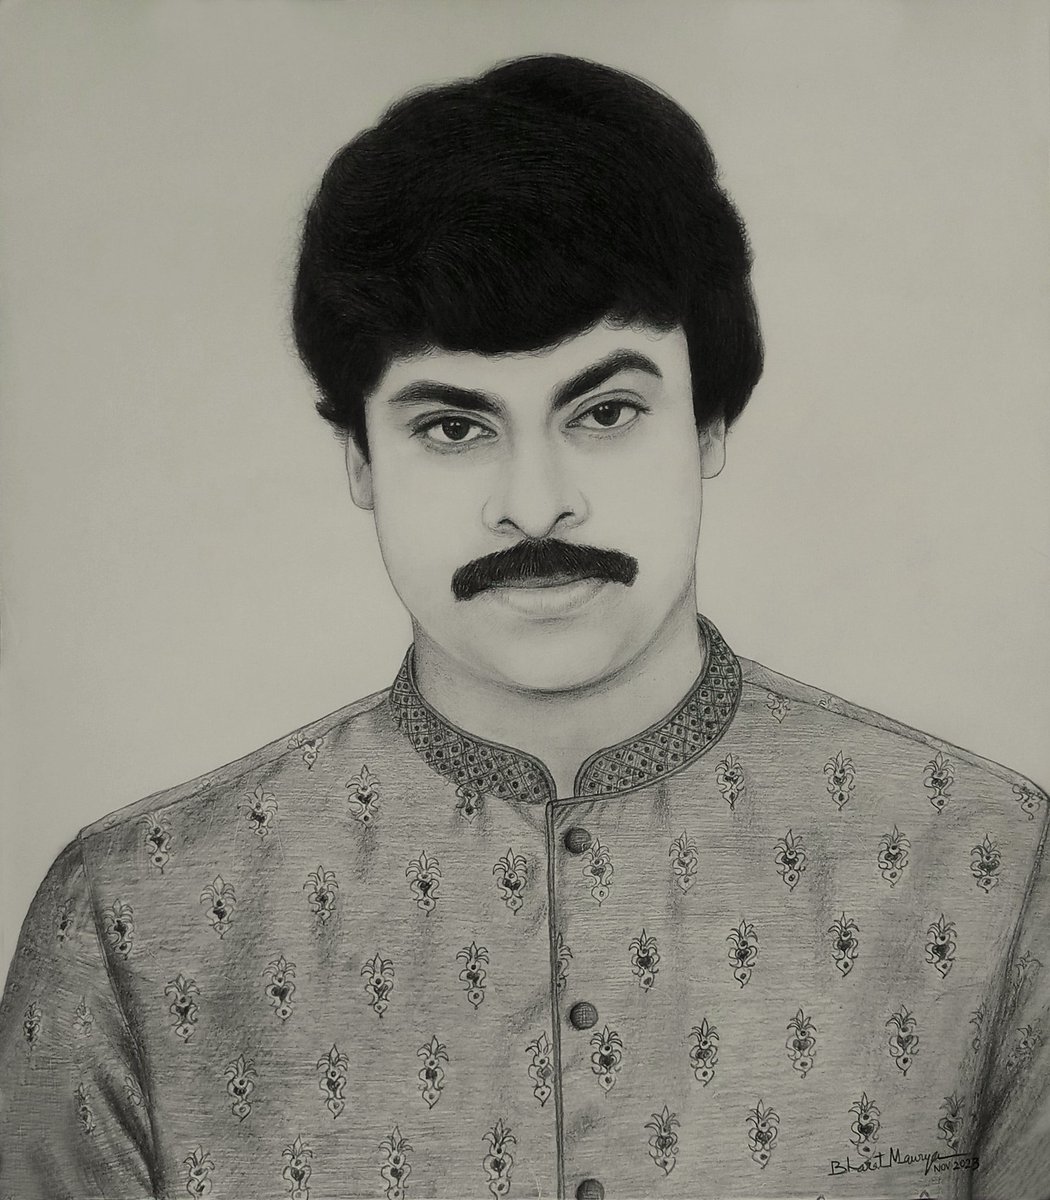 Megastar Chiranjeevi is an Indian actor, film producer and former politician. 
#mauryafinearts #naturalintelligenceart #NIart 
#chiranjeevi #megastar #teluguhero #tollywood #indianfilms #hyderabadartists #indianart #pencilportrait #sketch #portrait #traditionaldrawing #Celebrity